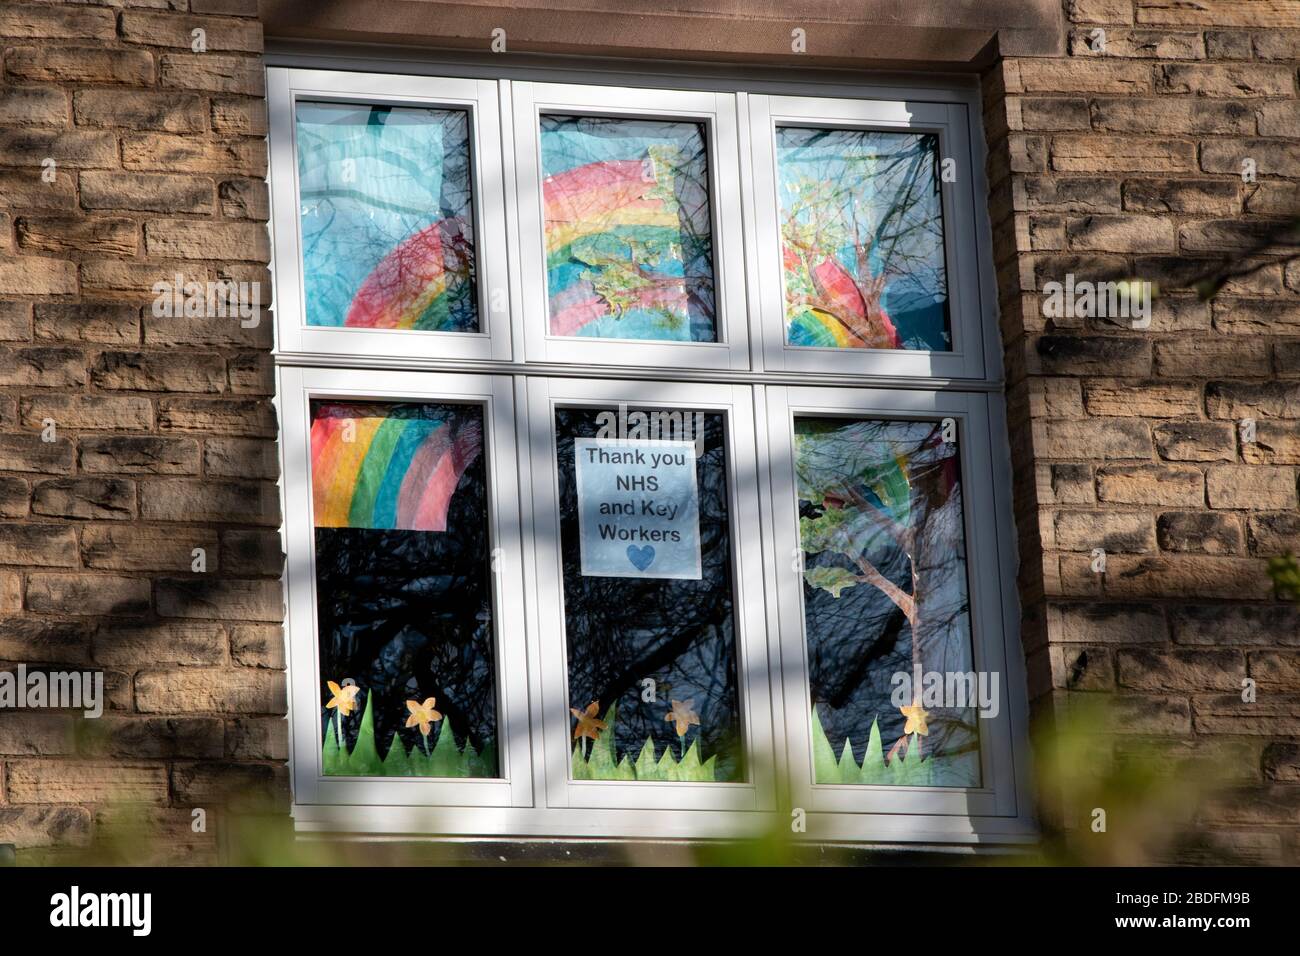 Rainbow of hope and thanks to NHS staff in window Stock Photo